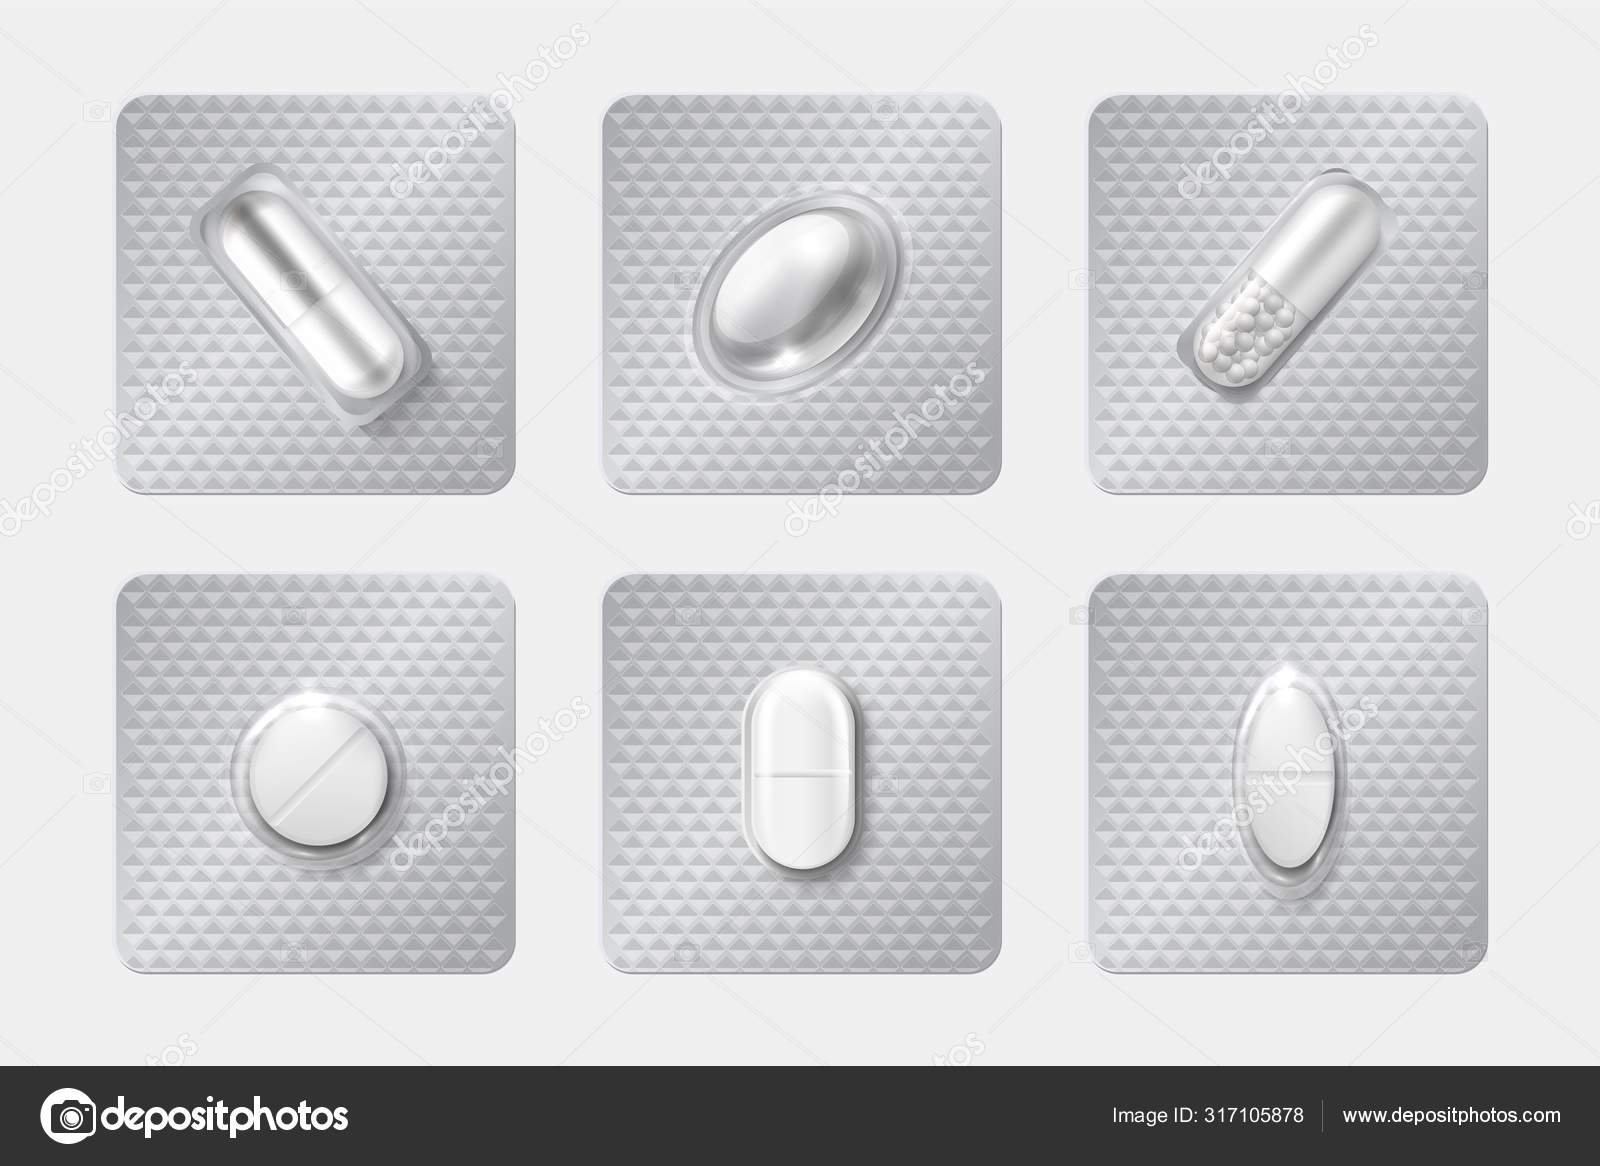 Download Realistic Pill Blisters Set Medicine Capsule And Pills In Blister Pack 3d Drugs And Vitamins Isolated Vector Mockup Vector Image By C Spicytruffel Vector Stock 317105878